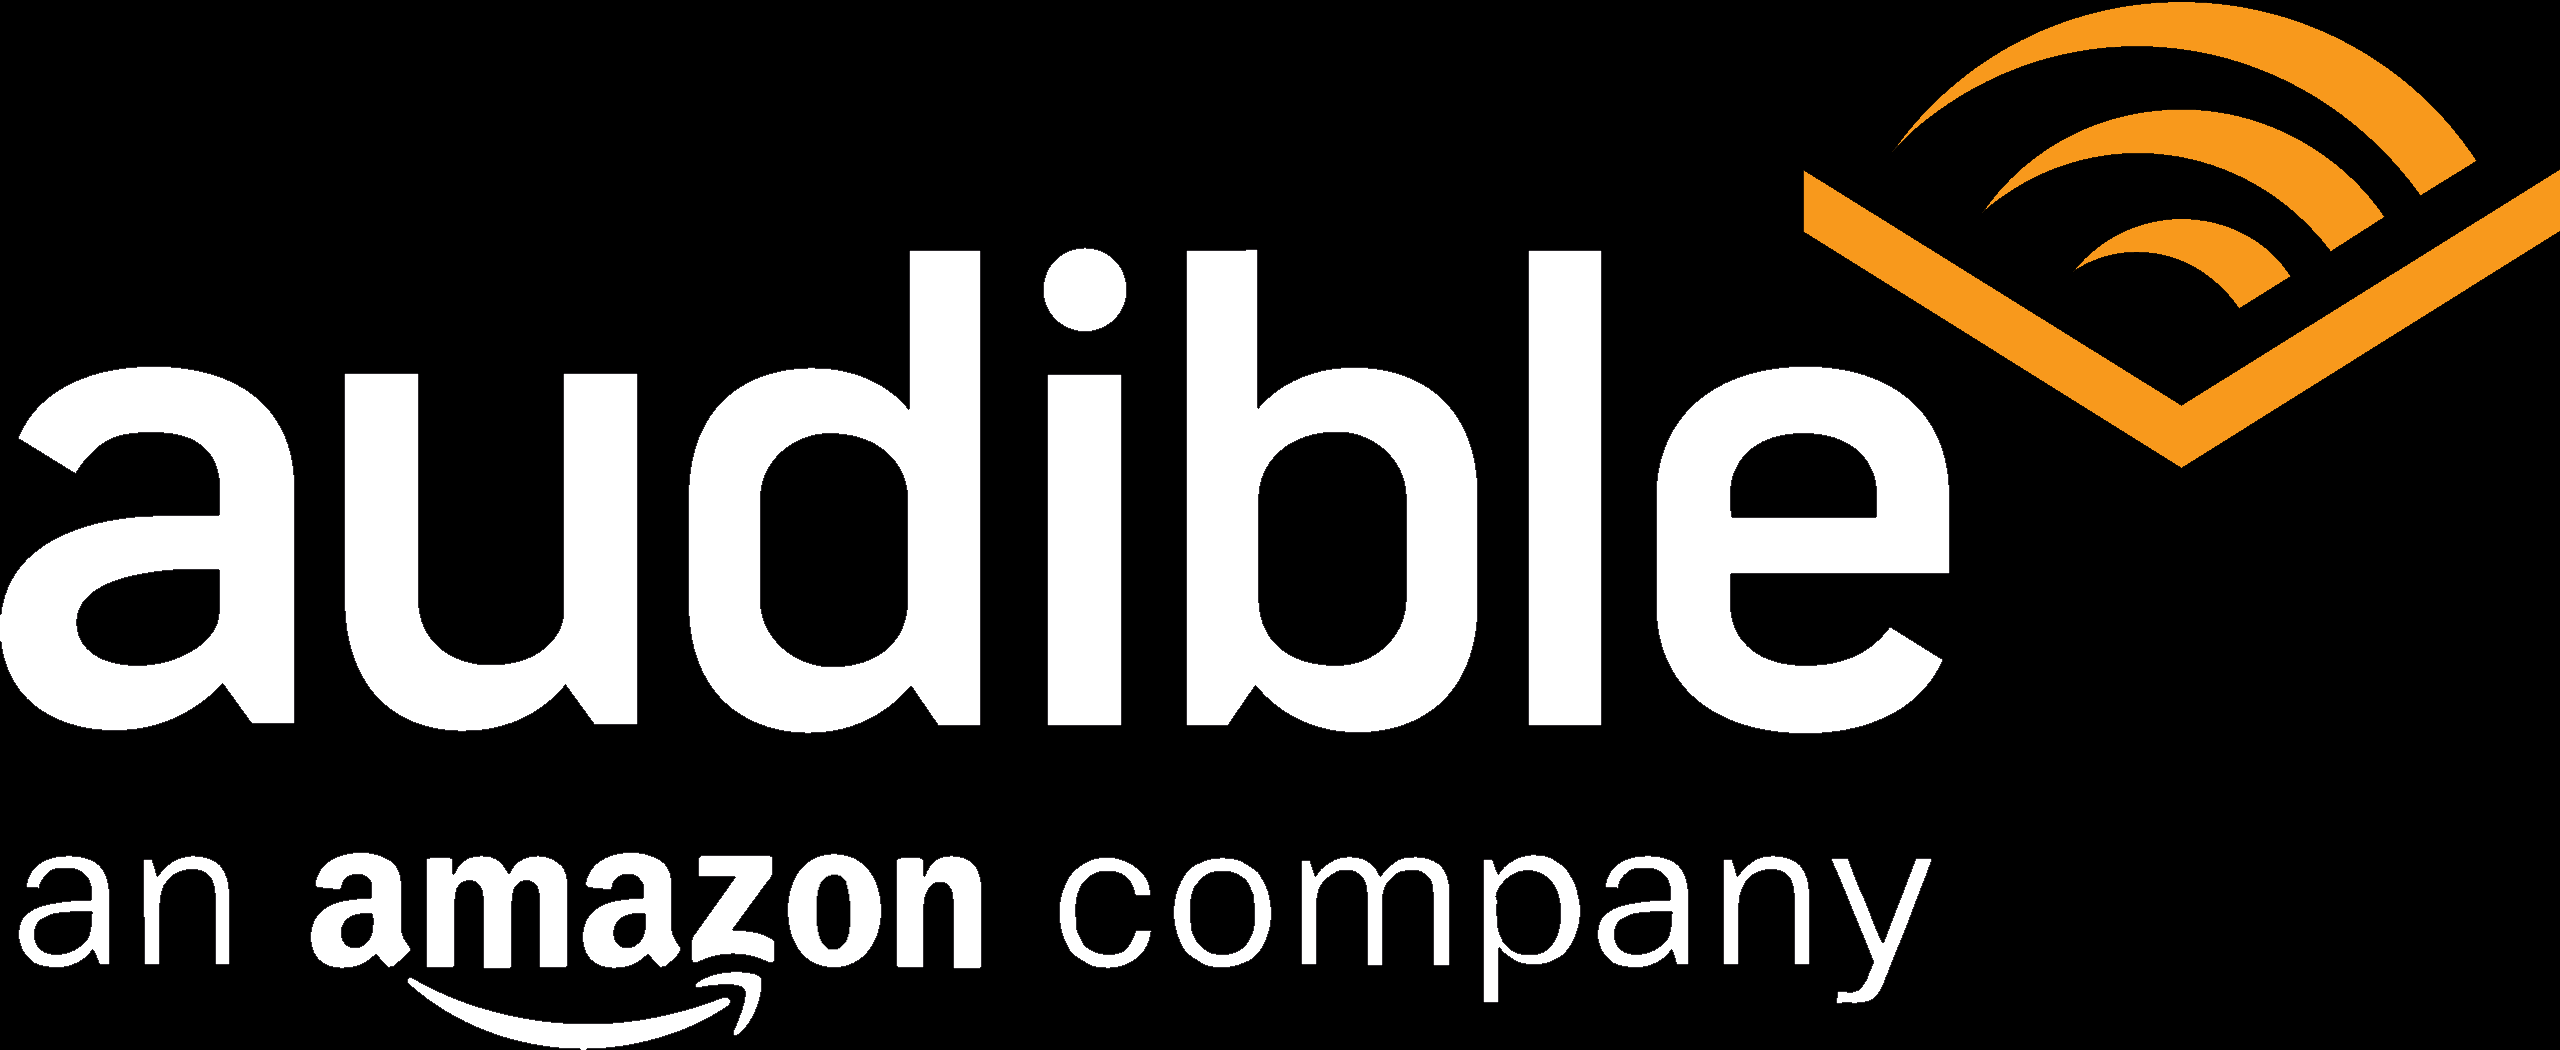 Audible Coupons & Promo Codes